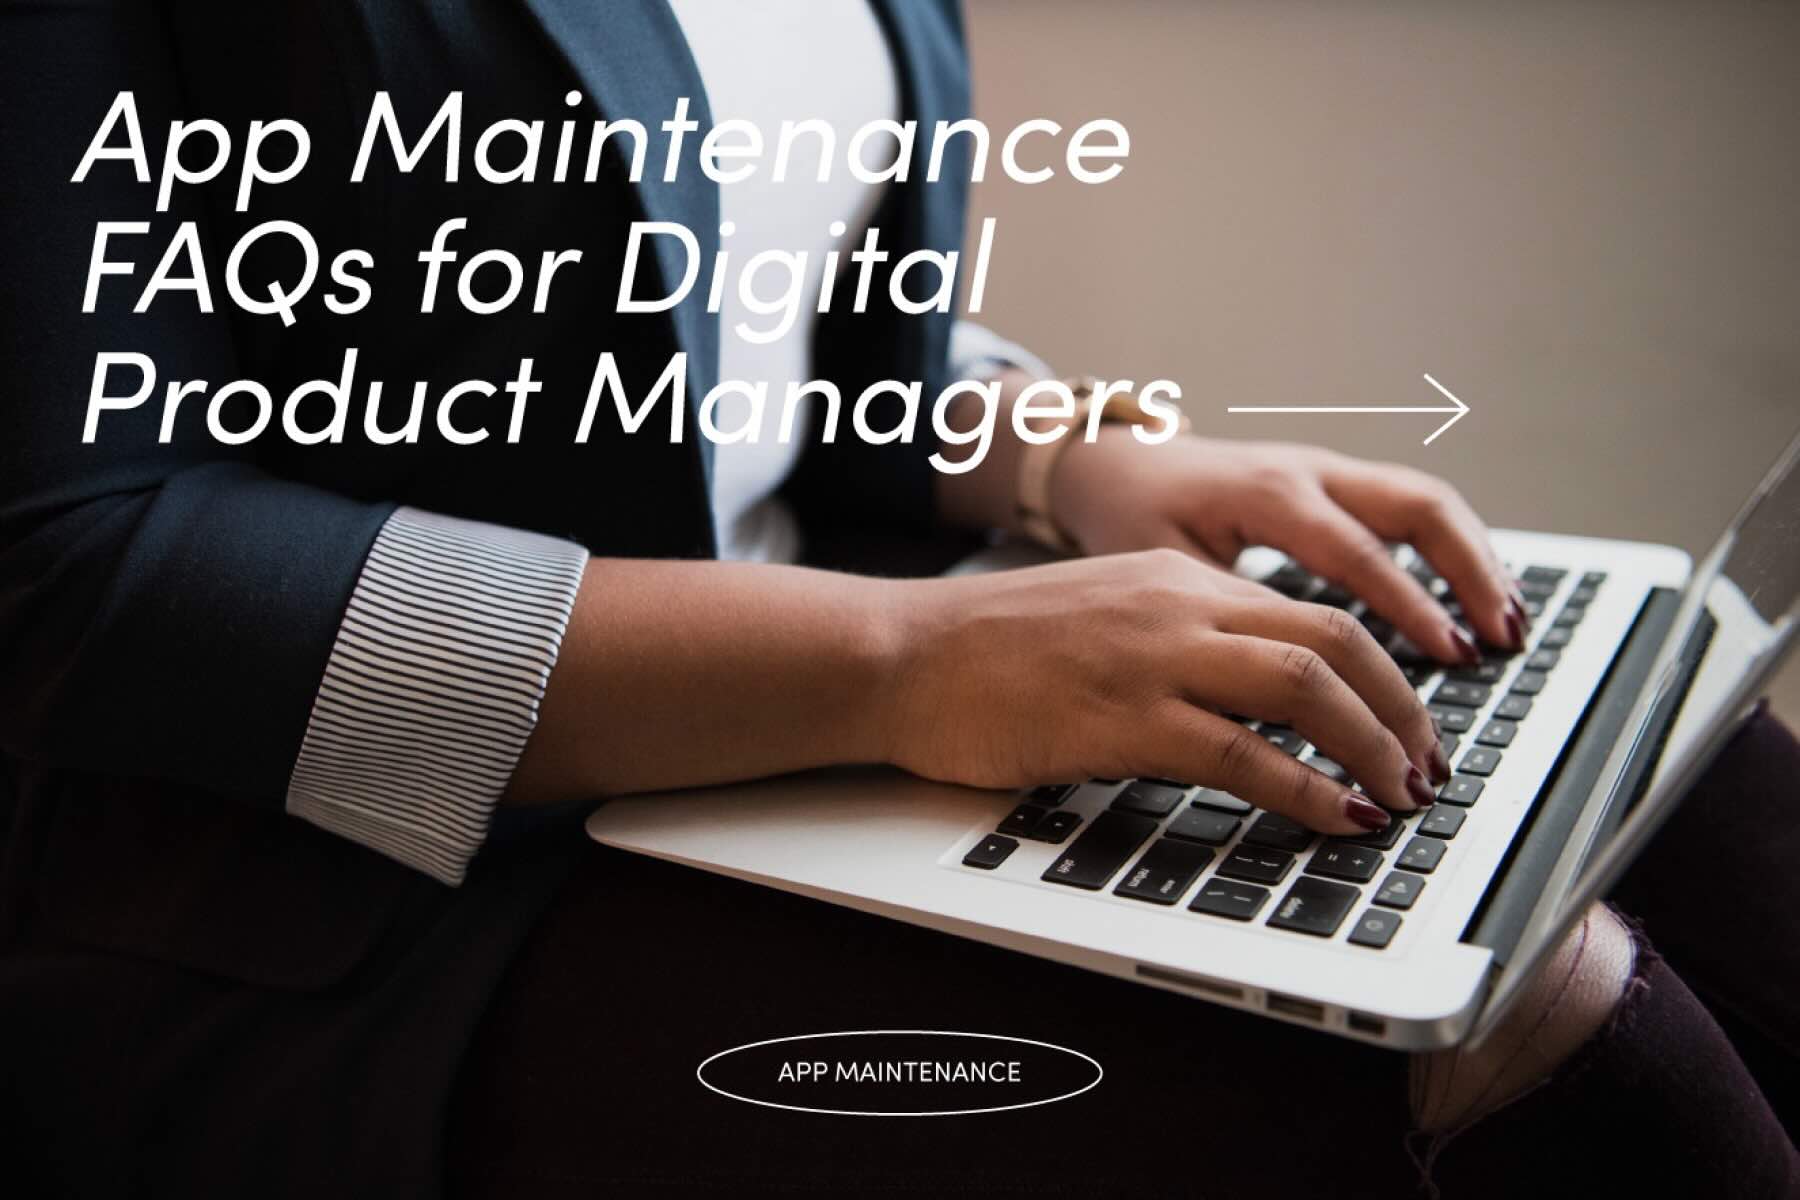 Answering Your Burning Questions: App Maintenance FAQs for Digital Product Managers Image